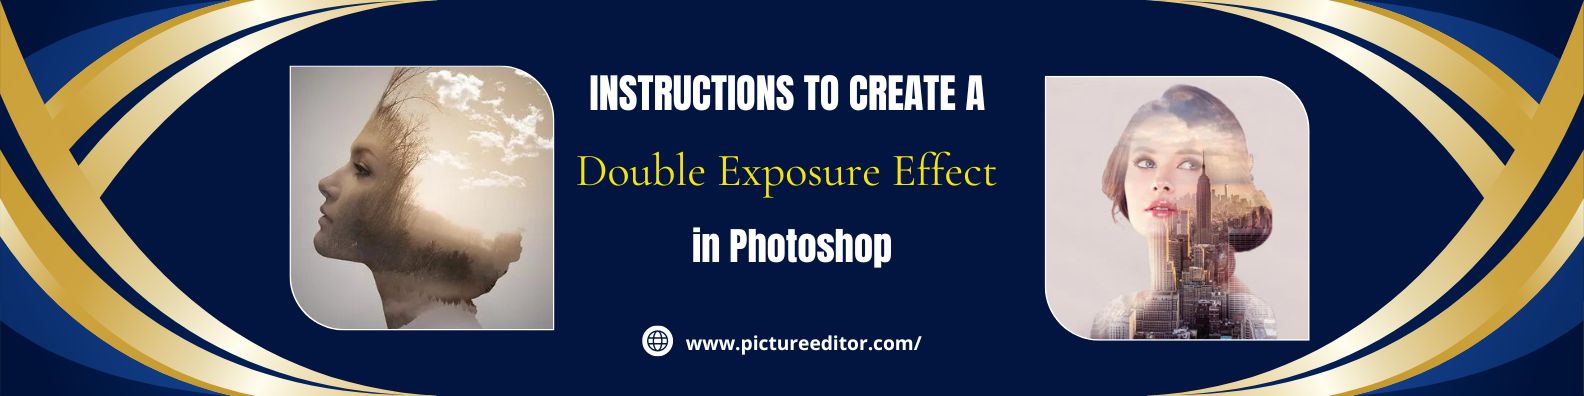 Instructions to Create a Double Exposure Effect in Photoshop